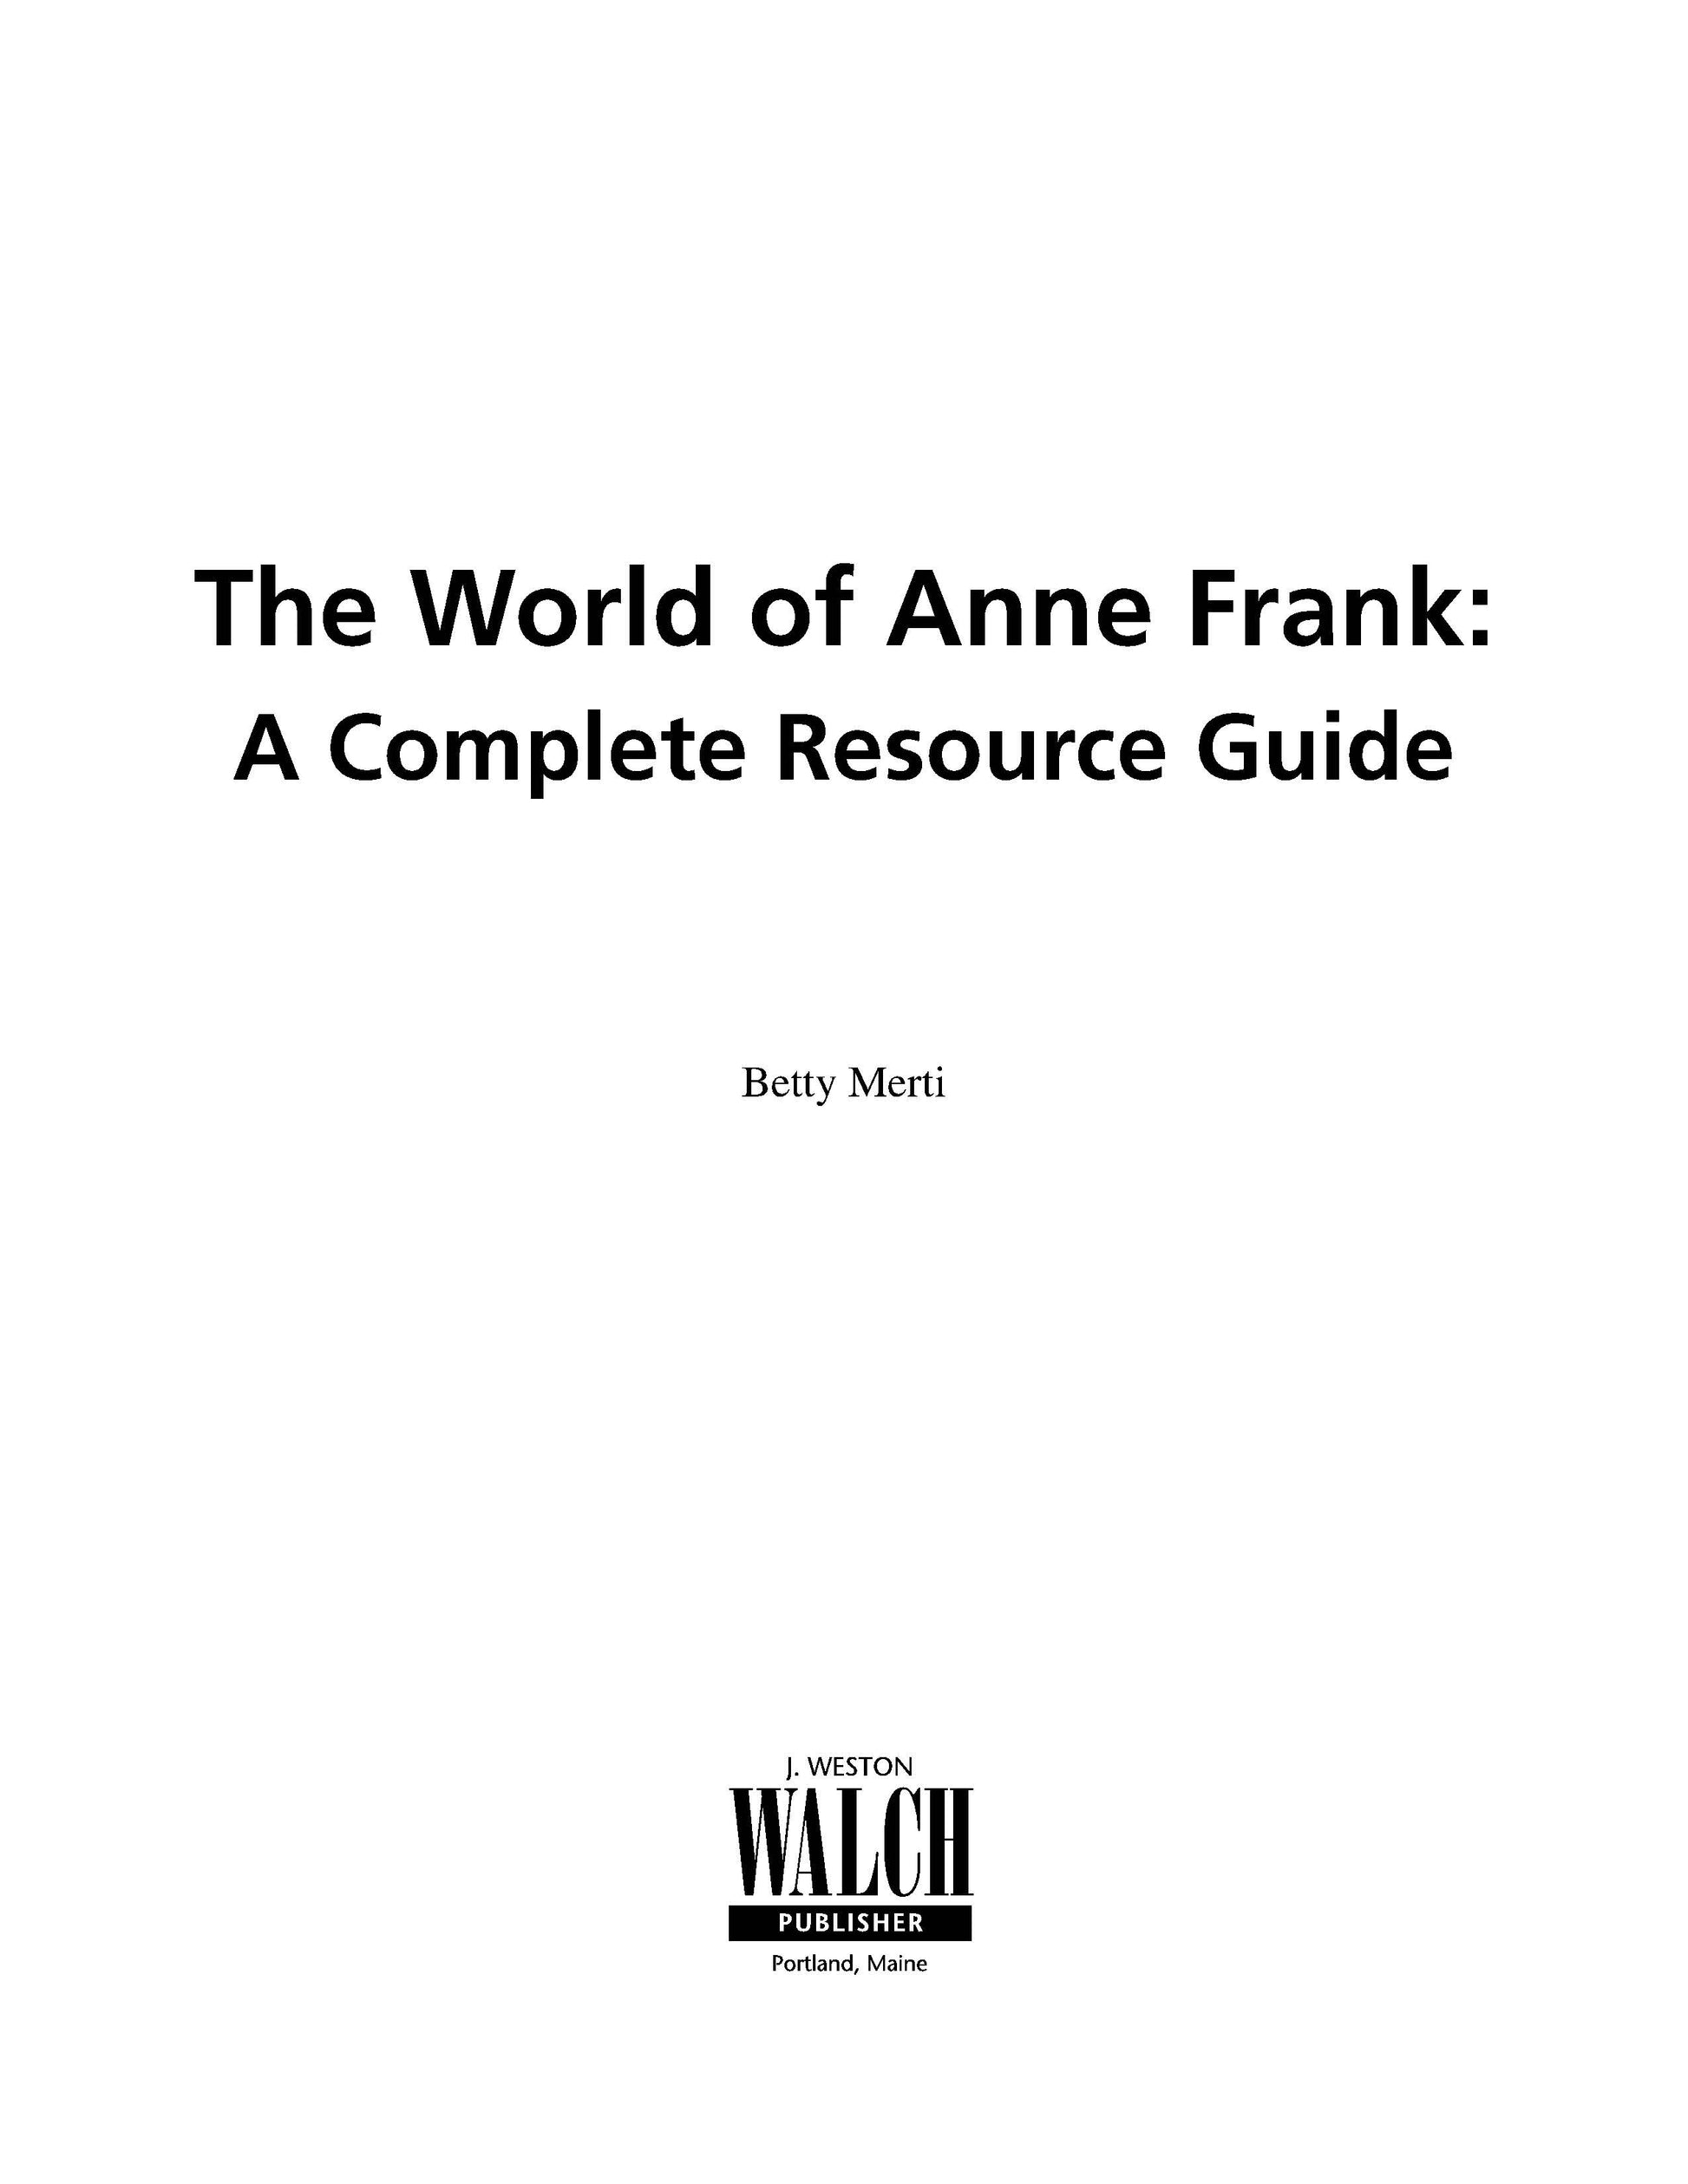 Bright Education Australia, Teacher Resources, Book, History, World of Anne Frank: The Complete Resource, Second World War, WW2, WWII